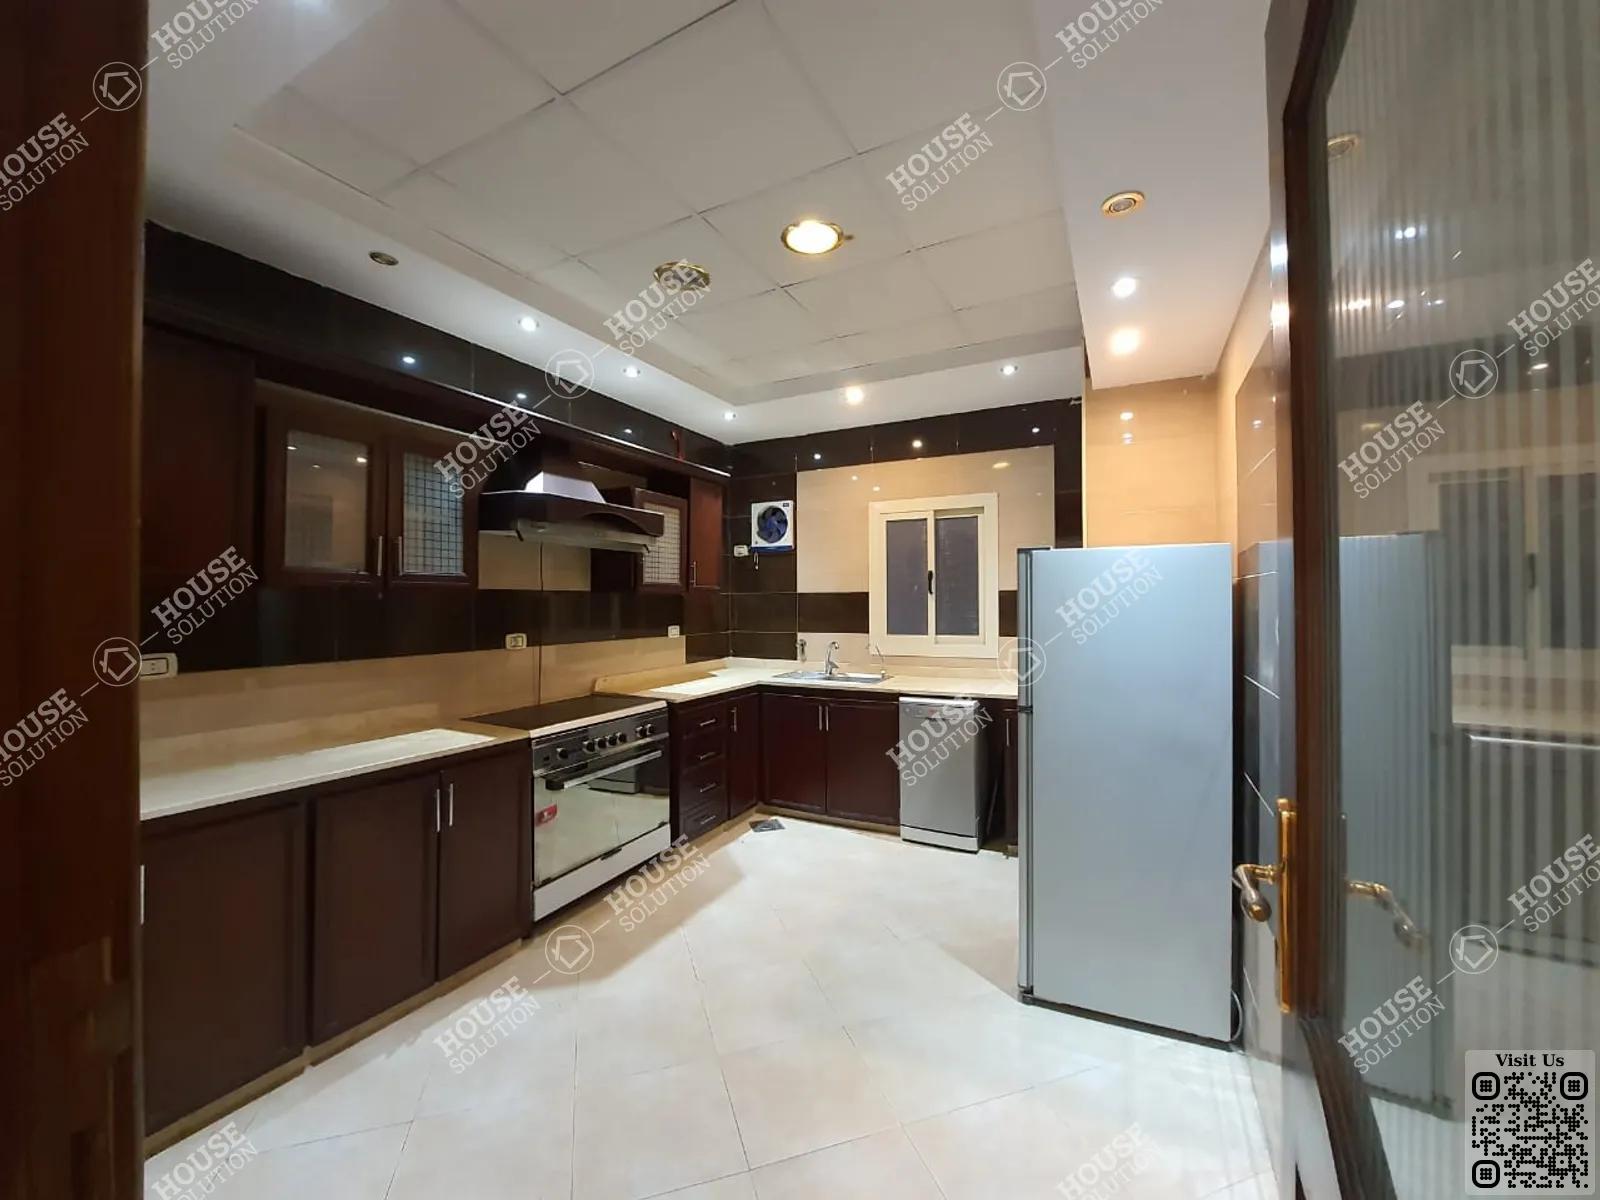 KITCHEN  @ Apartments For Rent In Maadi Maadi Degla Area: 180 m² consists of 3 Bedrooms 3 Bathrooms Modern furnished 5 stars #4319-1